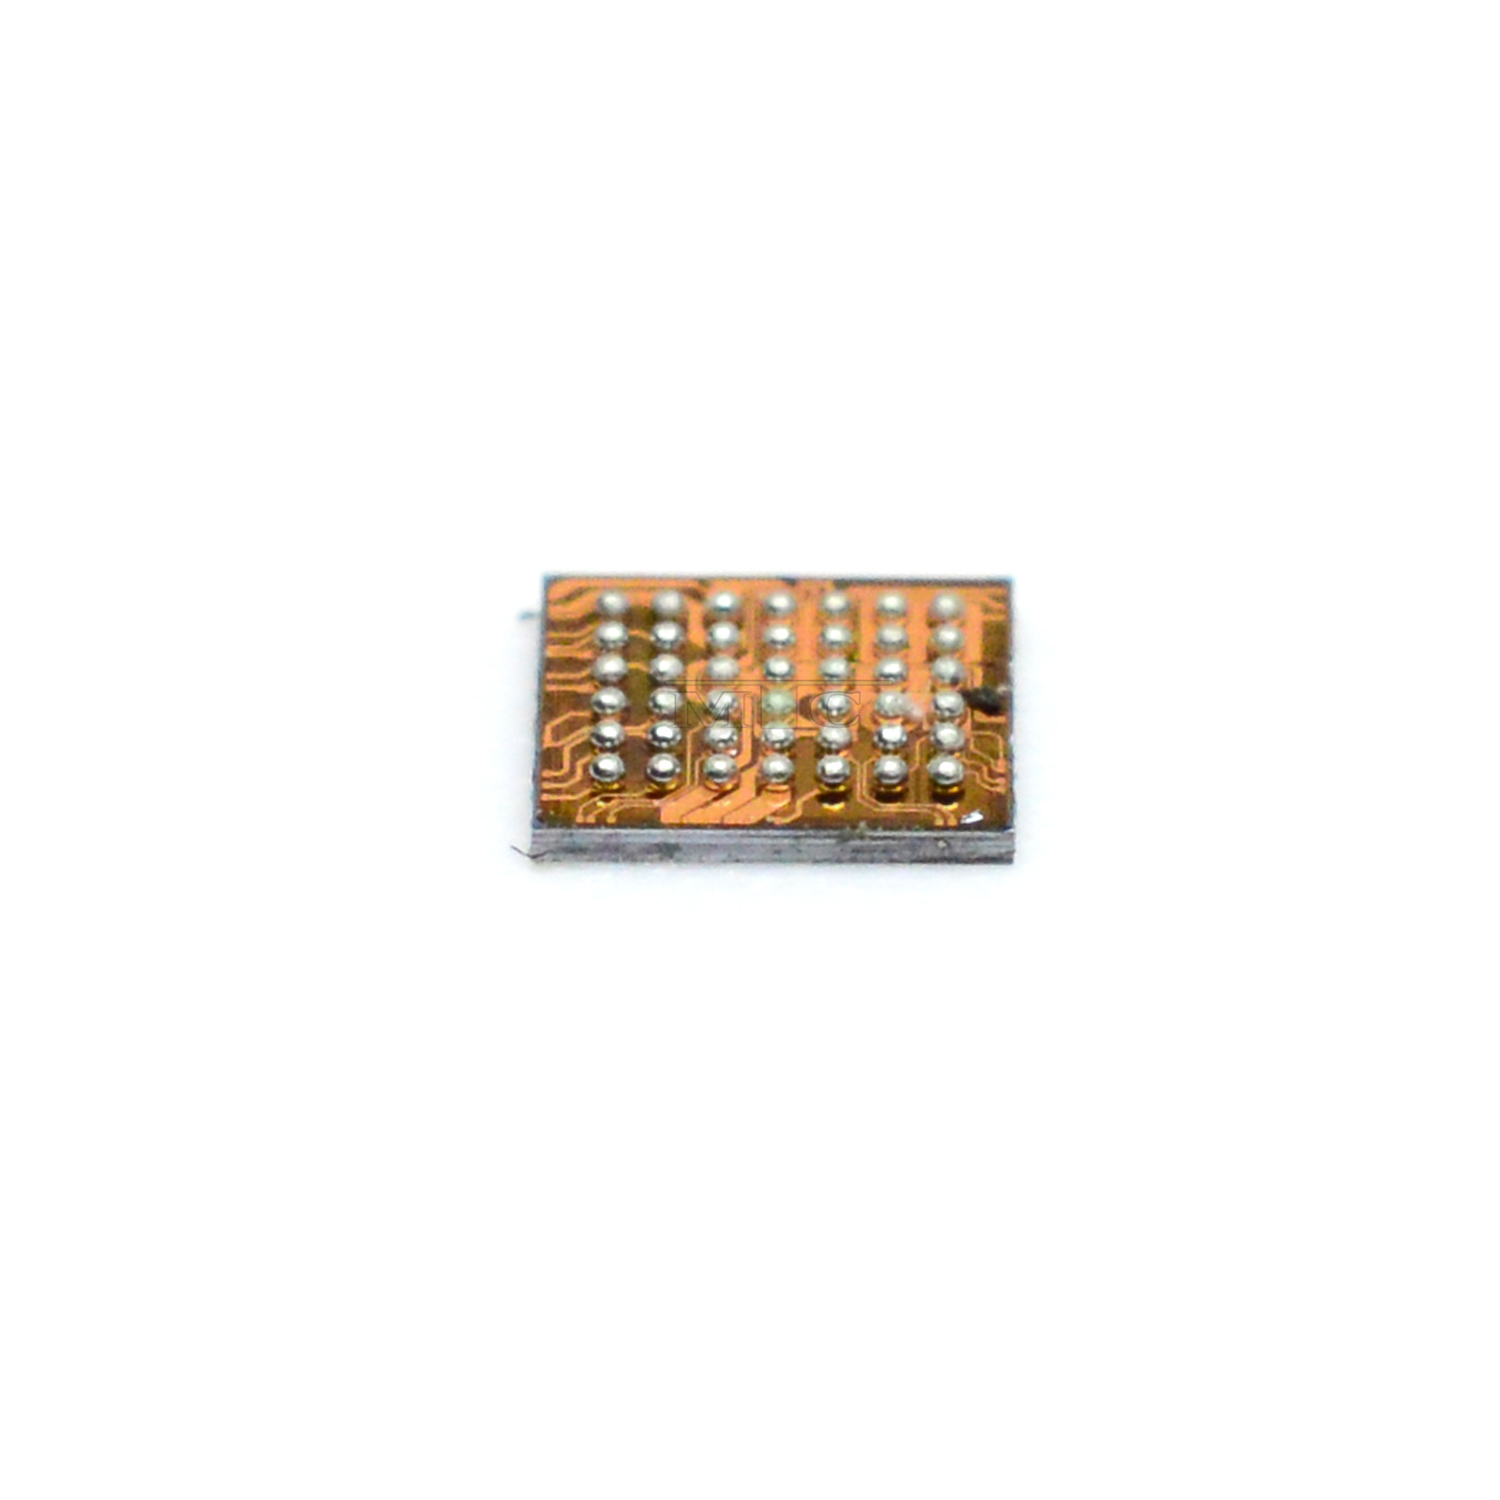 iPhone 6S/7/7+ Small Audio IC 338S00220